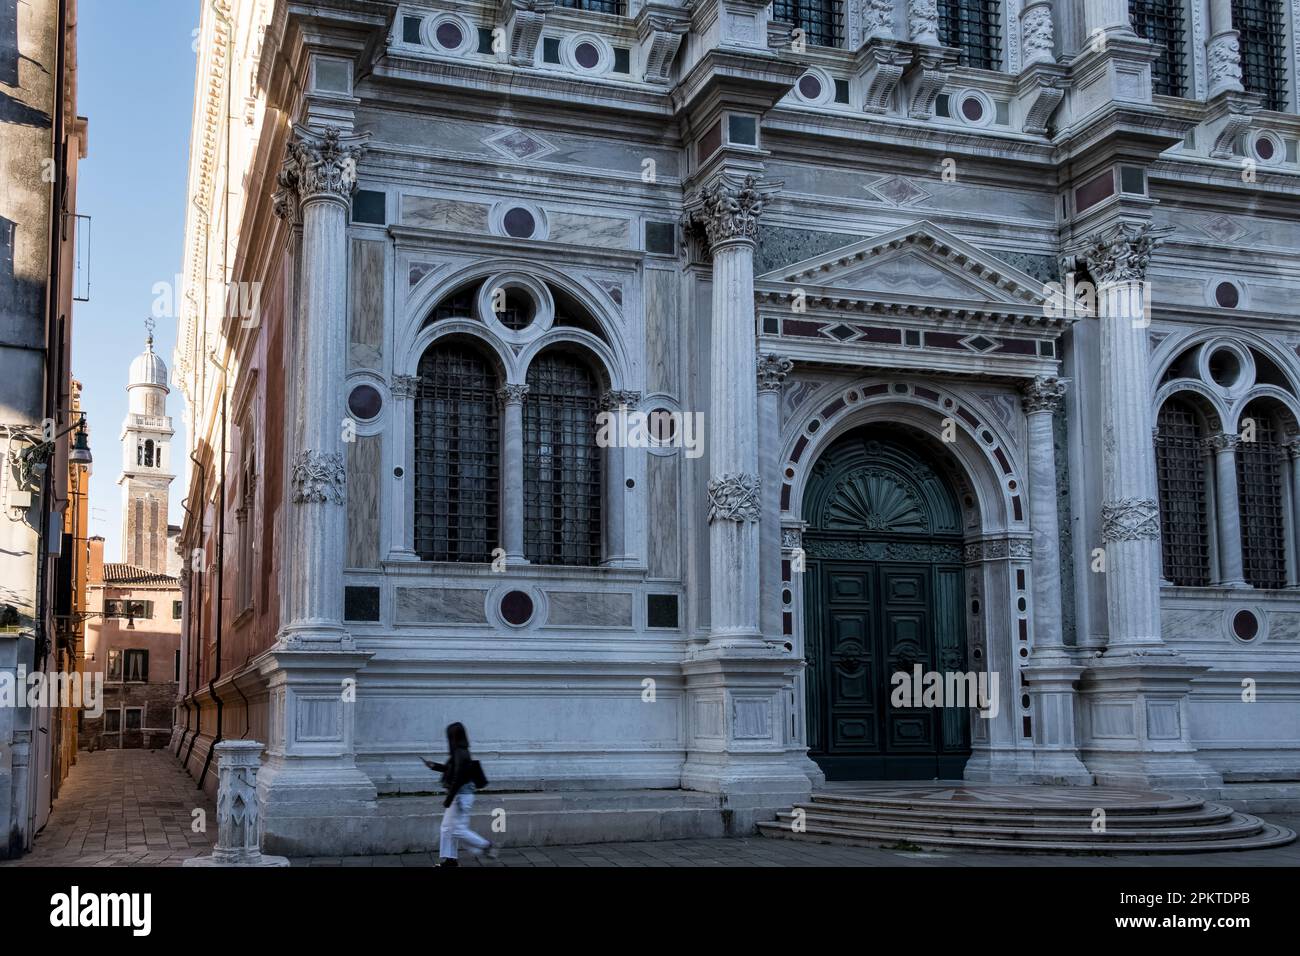 View of the Church of Saint Roch (Chiesa di San Rocco), a Roman Catholic church dedicated to Saint Roch in Venice, northern Italy. Stock Photo